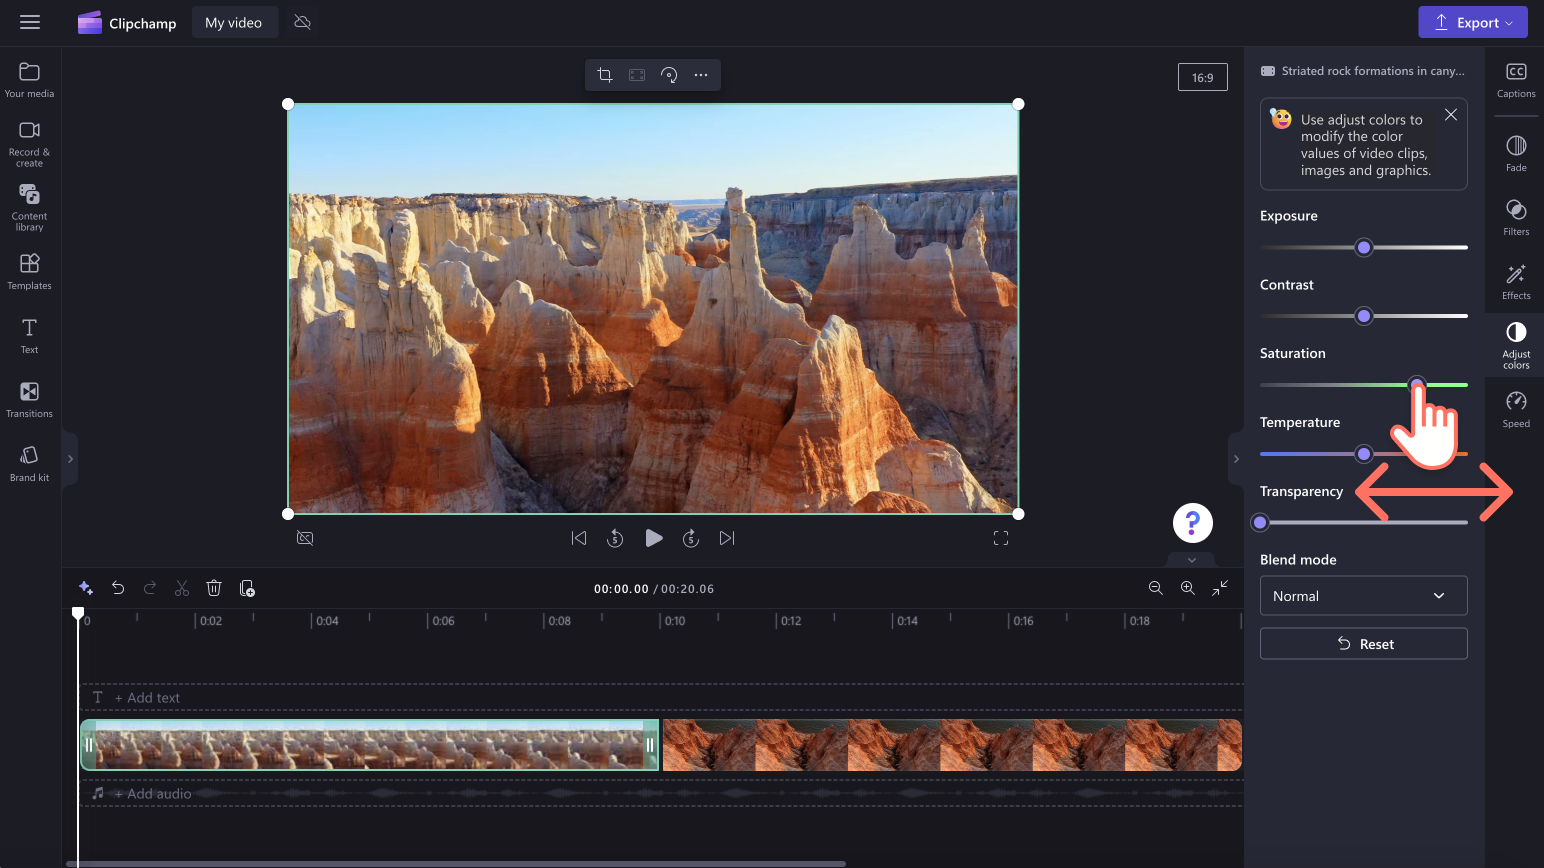 An image of a user editing the saturation of a video using the slider.